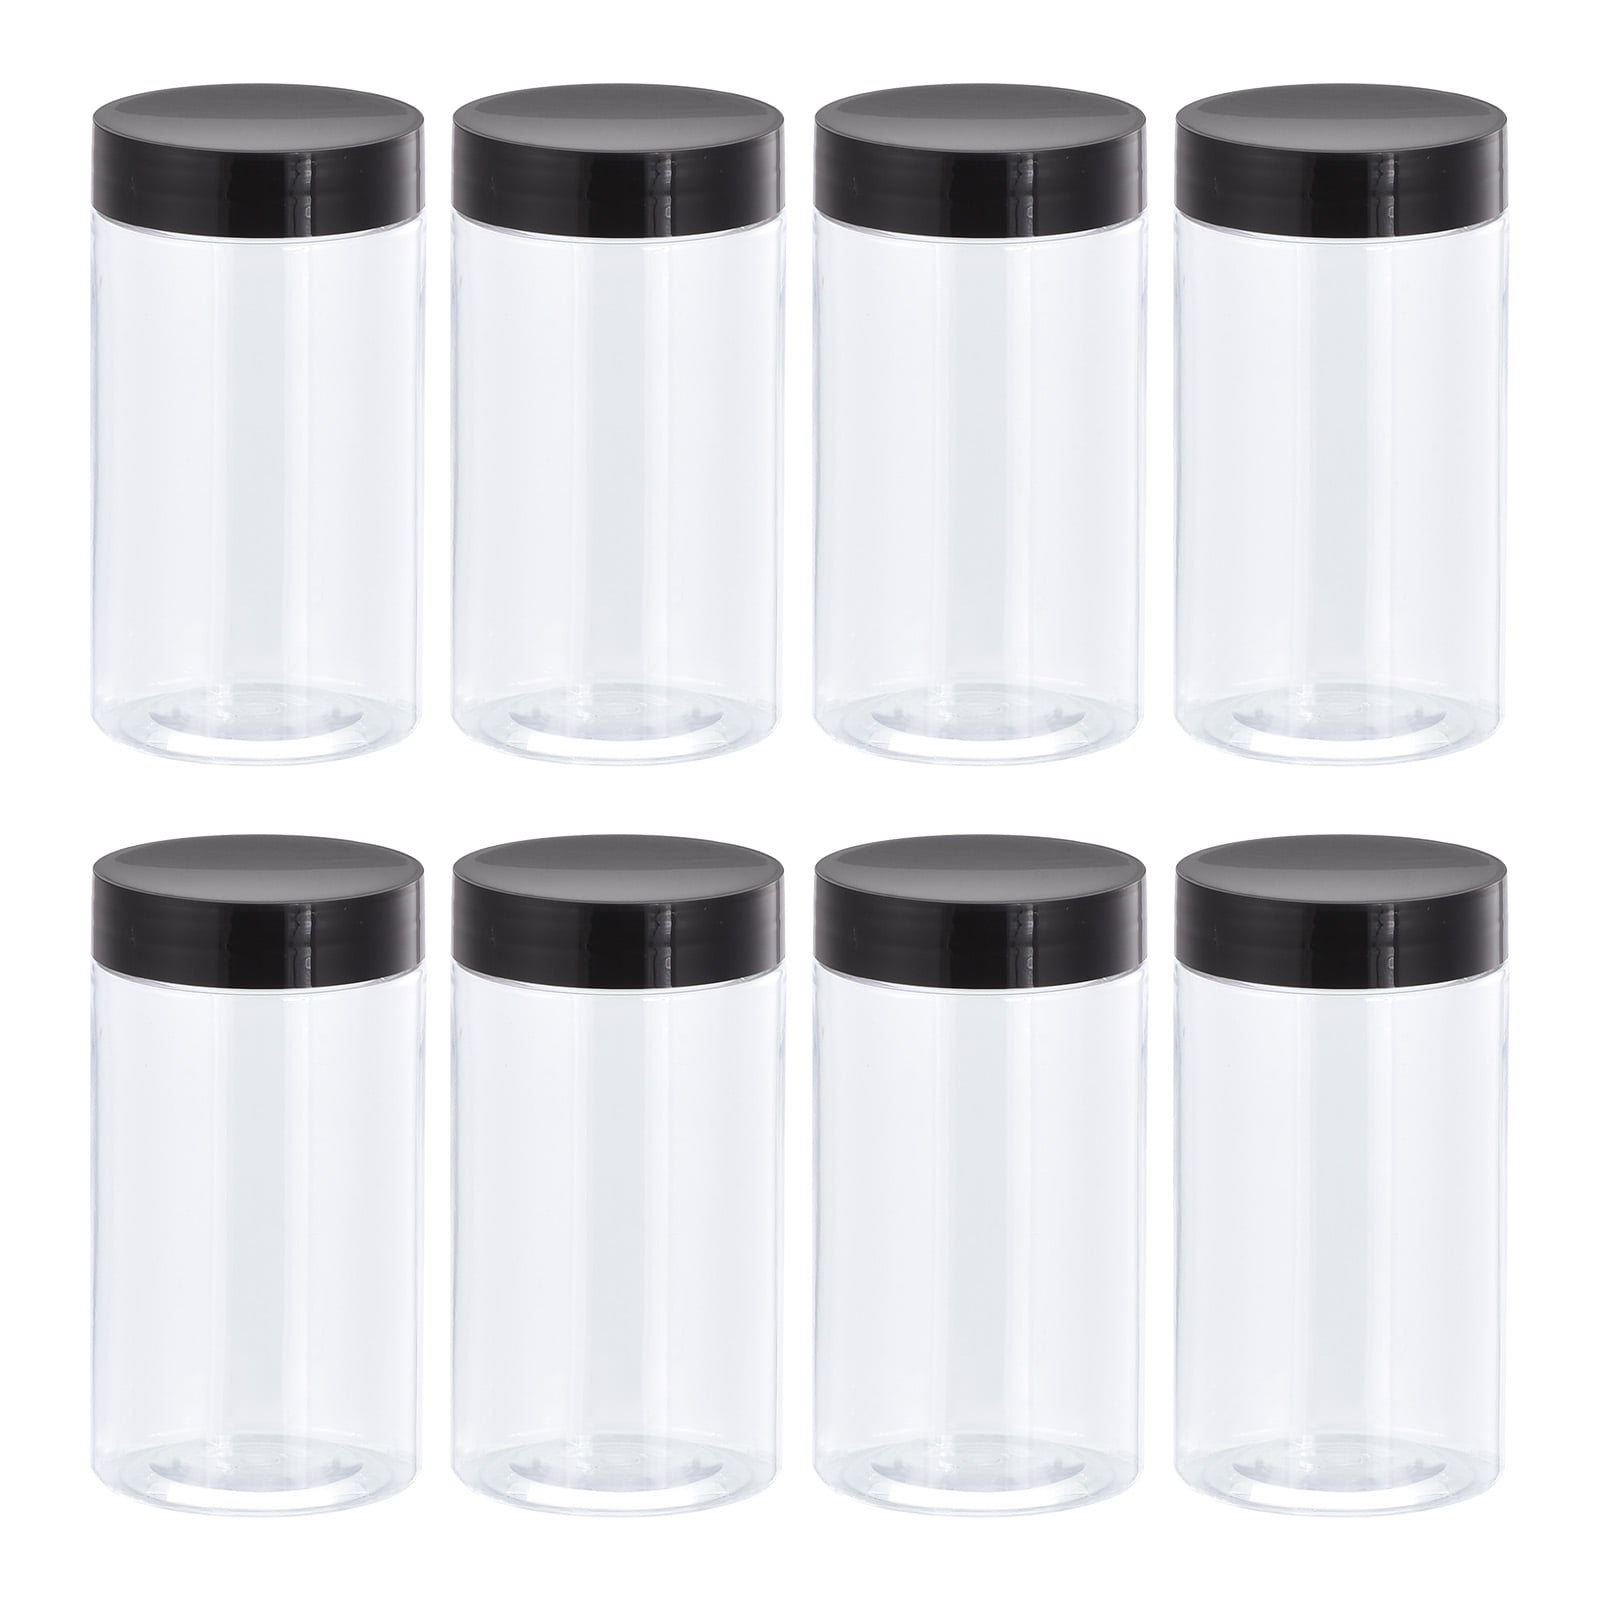 DecorRack 12 Pack 8 Oz Small Empty Plastic Storage Jars with Screw On Lids  Round Wide Mouth Food Grade All Purpose Storage Containers for Kitchen, Art